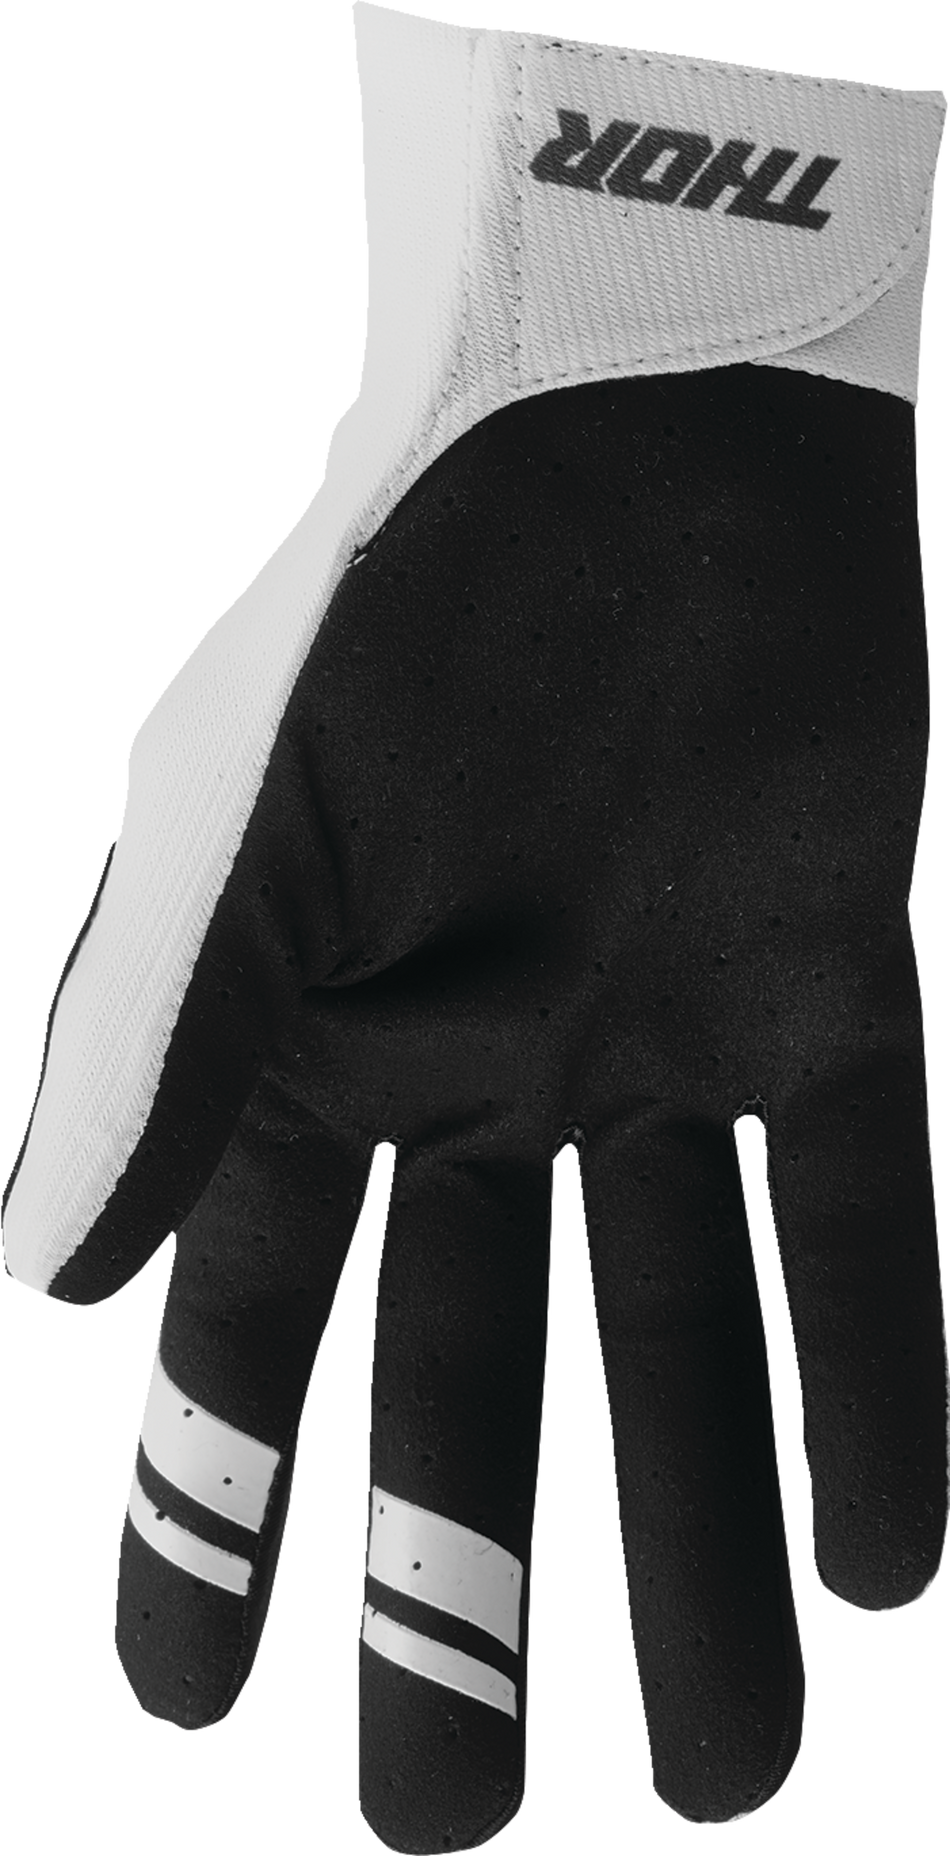 THOR Intense Assist Decoy Gloves - White/Camo - Large 3360-0226